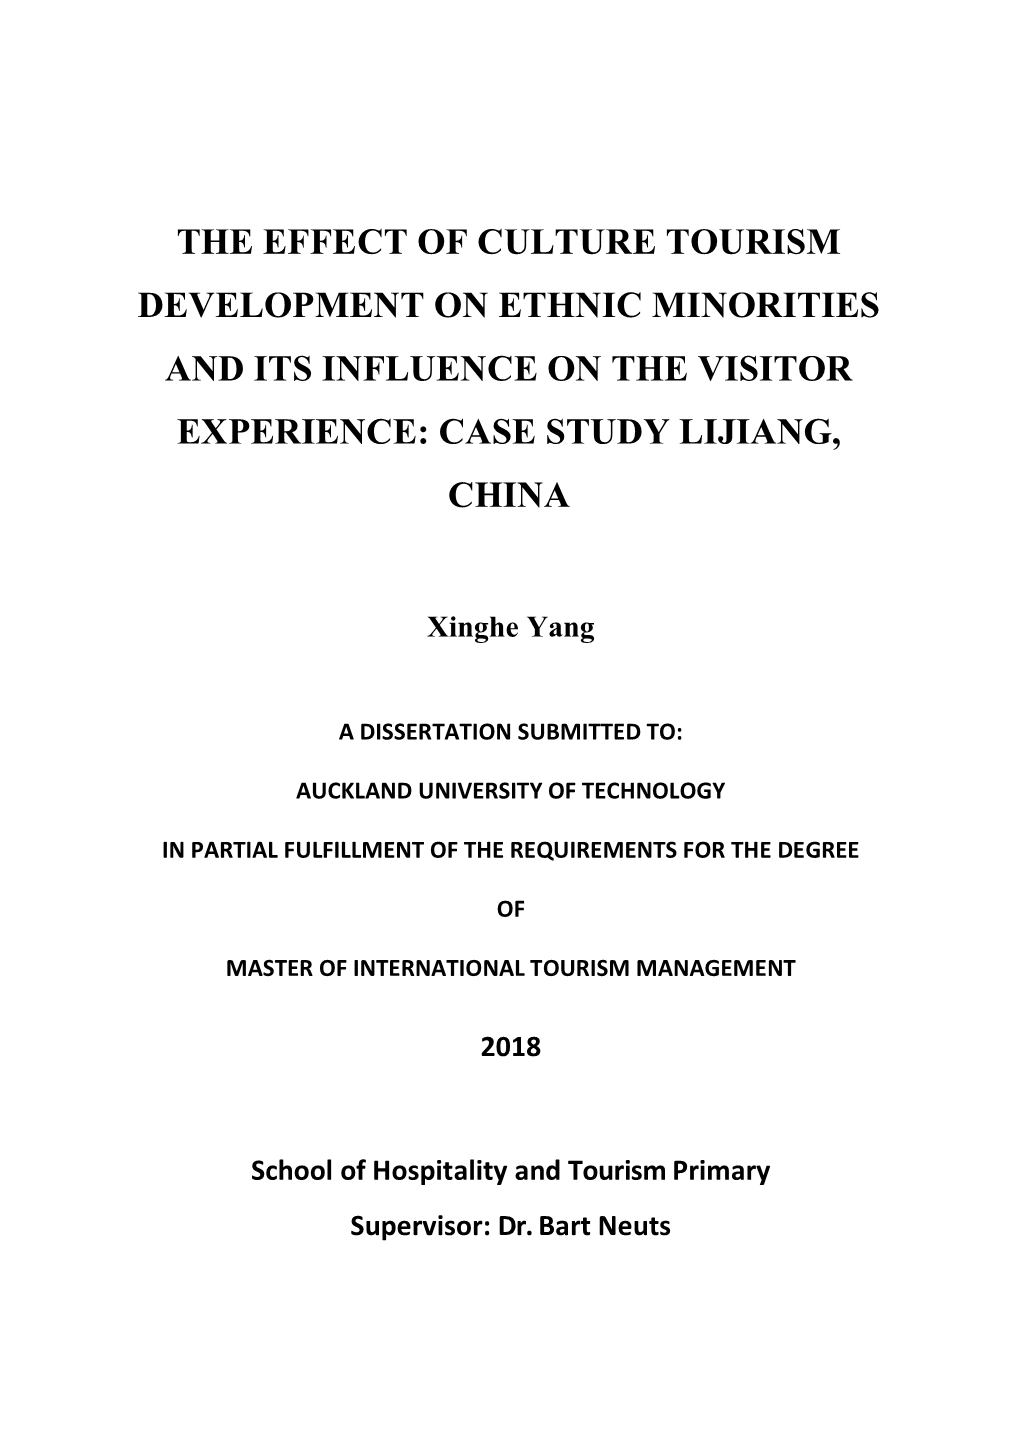 The Effect of Culture Tourism Development on Ethnic Minorities and Its Influence on the Visitor Experience: Case Study Lijiang, China